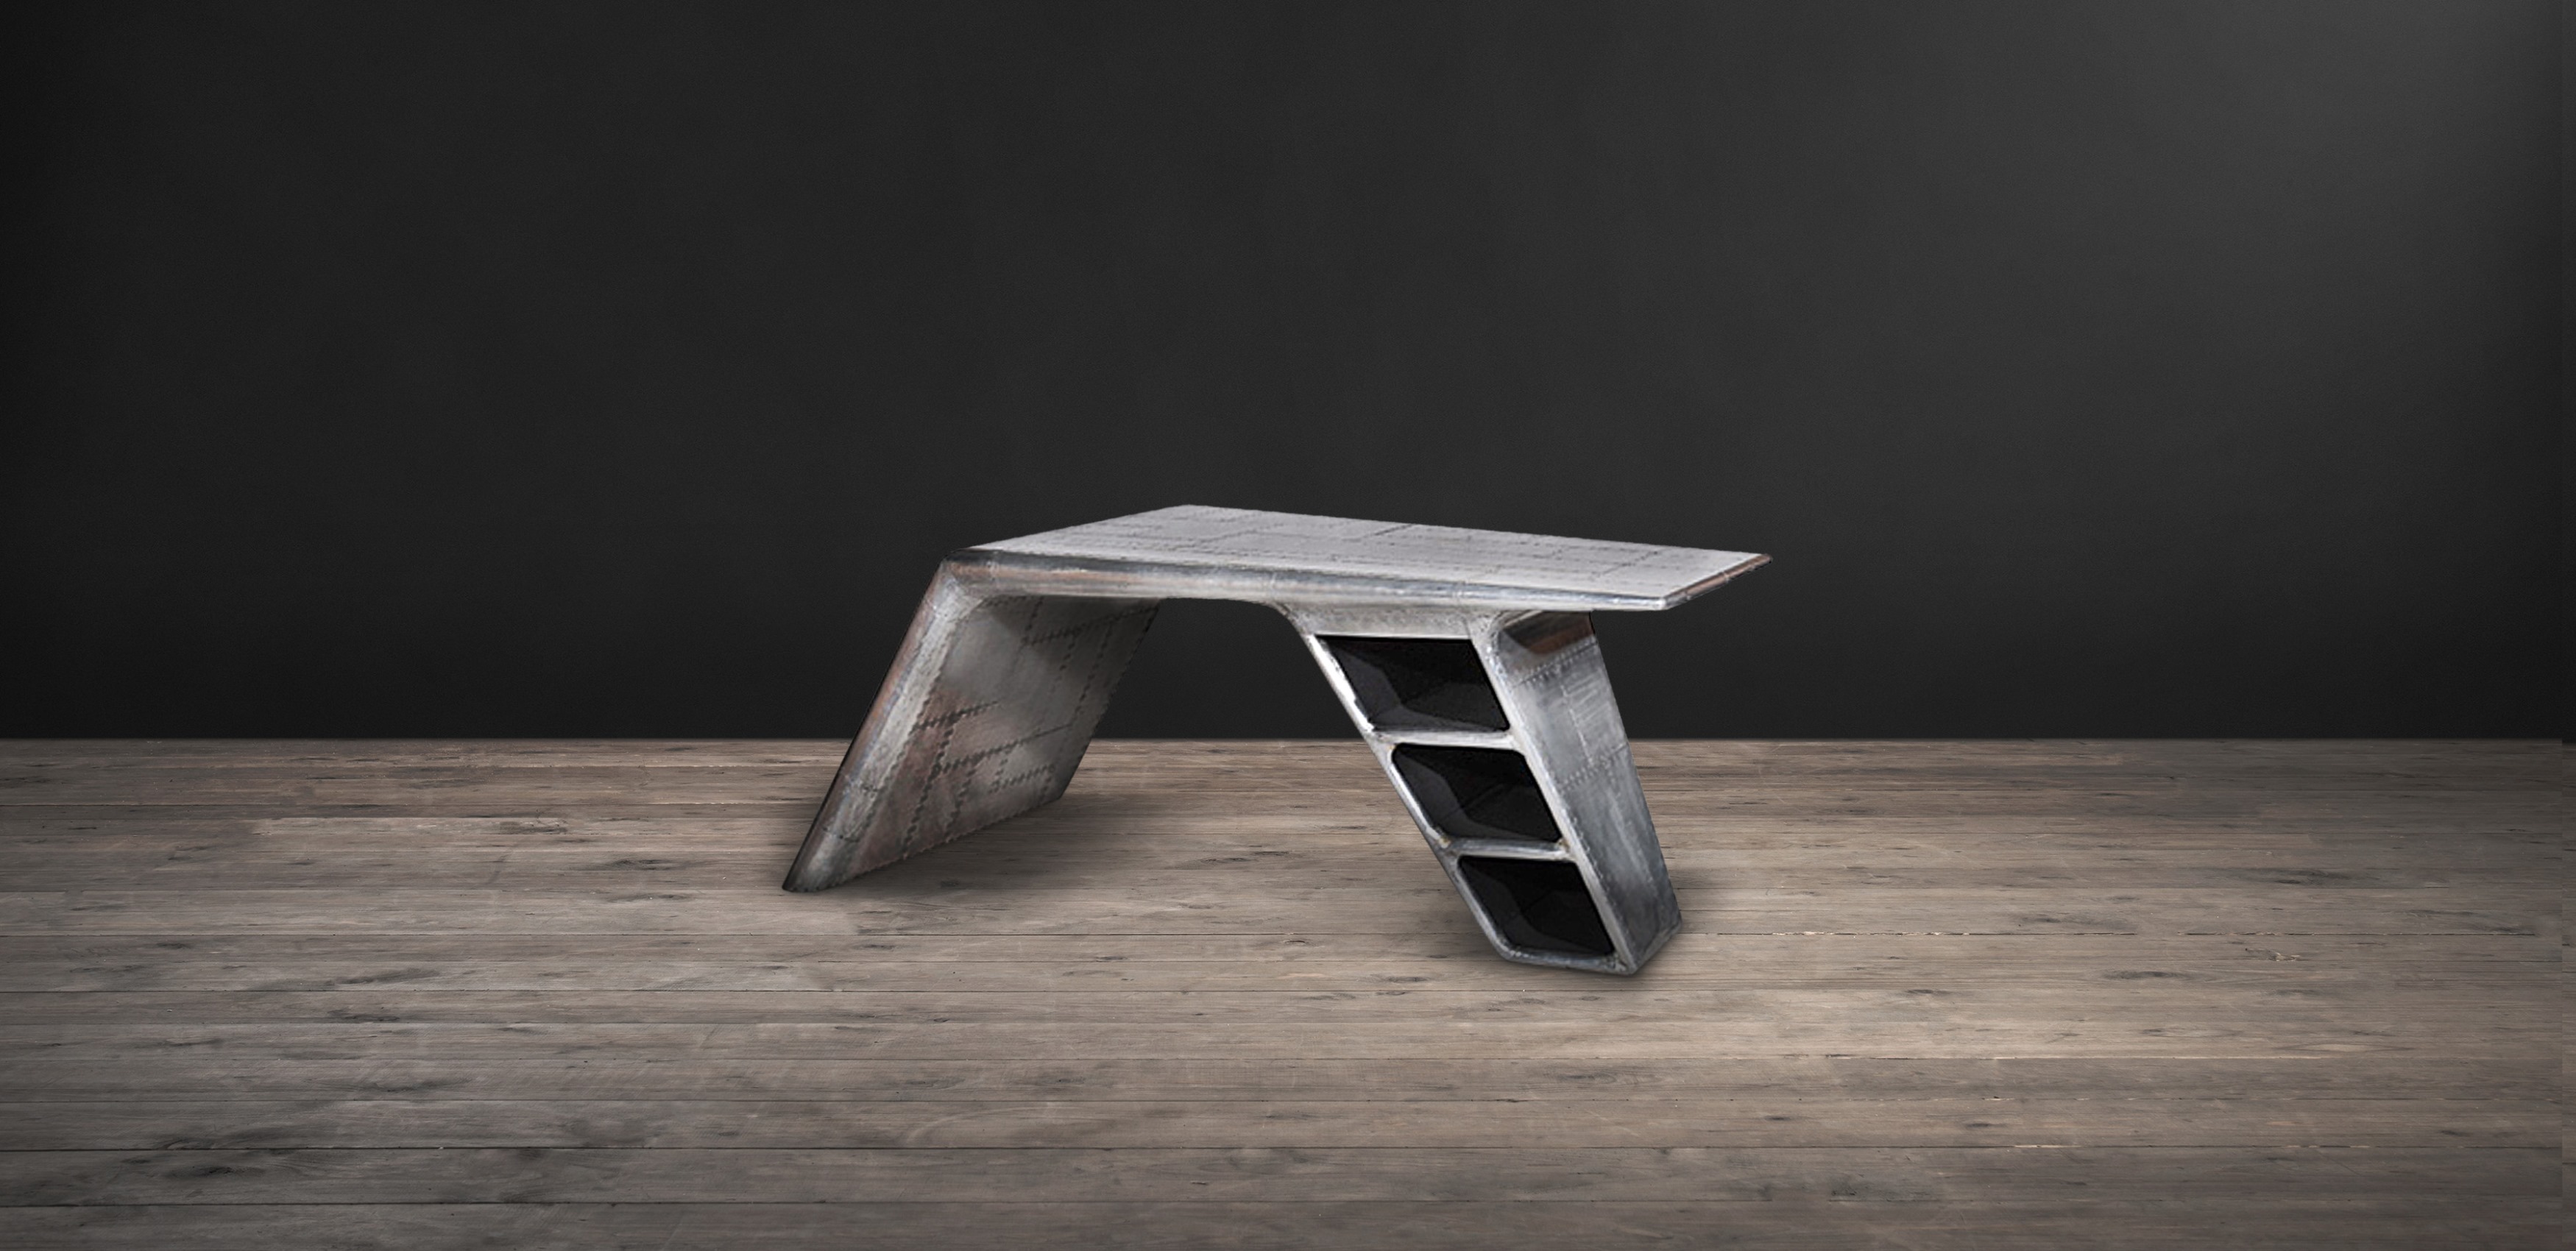 Aviator Valkyrie Desk Named After The North American Aviation Xb-70 Valkyrie; The Strategic Bomber